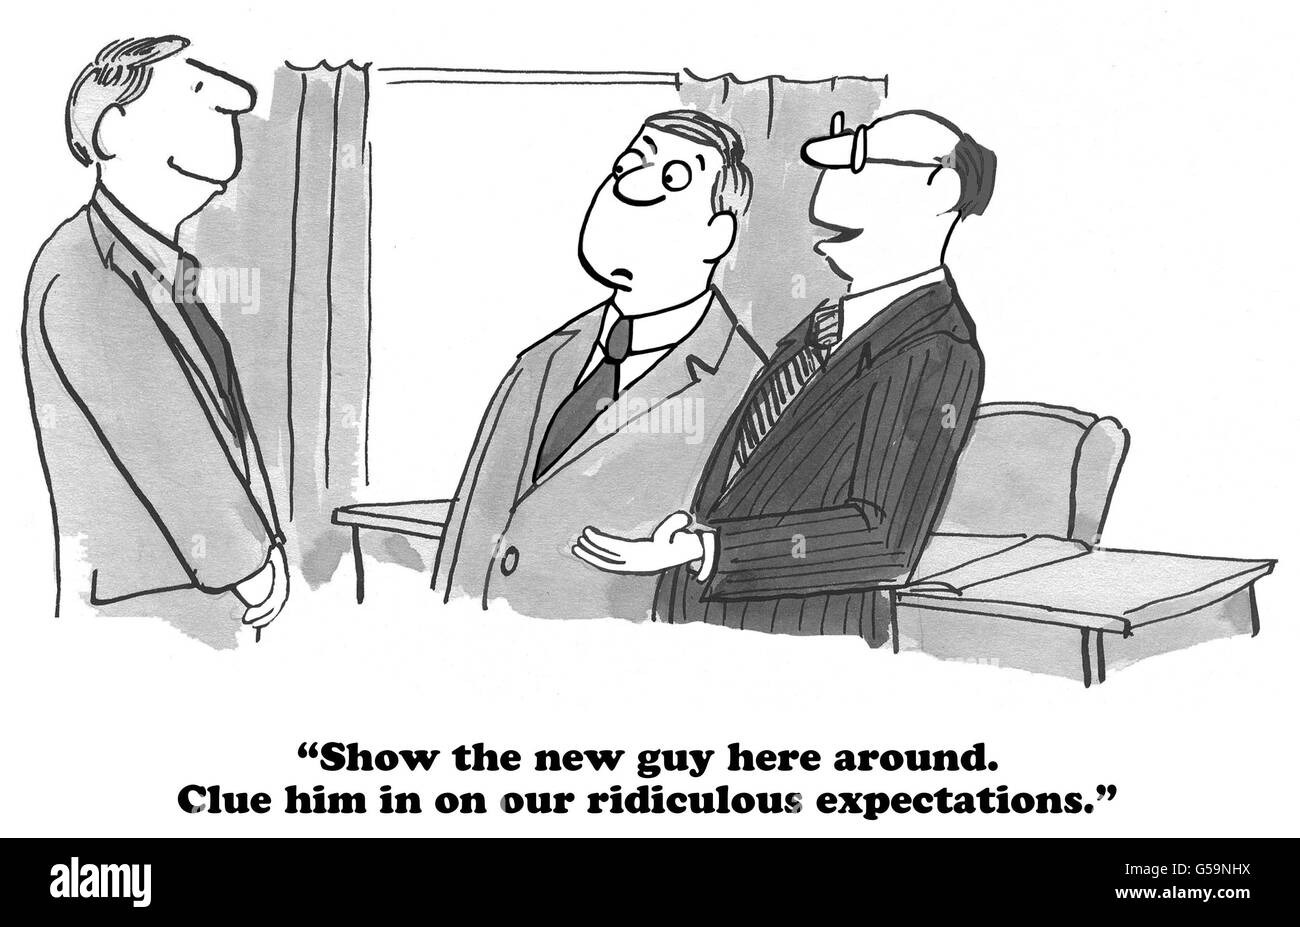 Business cartoon about a company with ridiculous expectations. Stock Photo